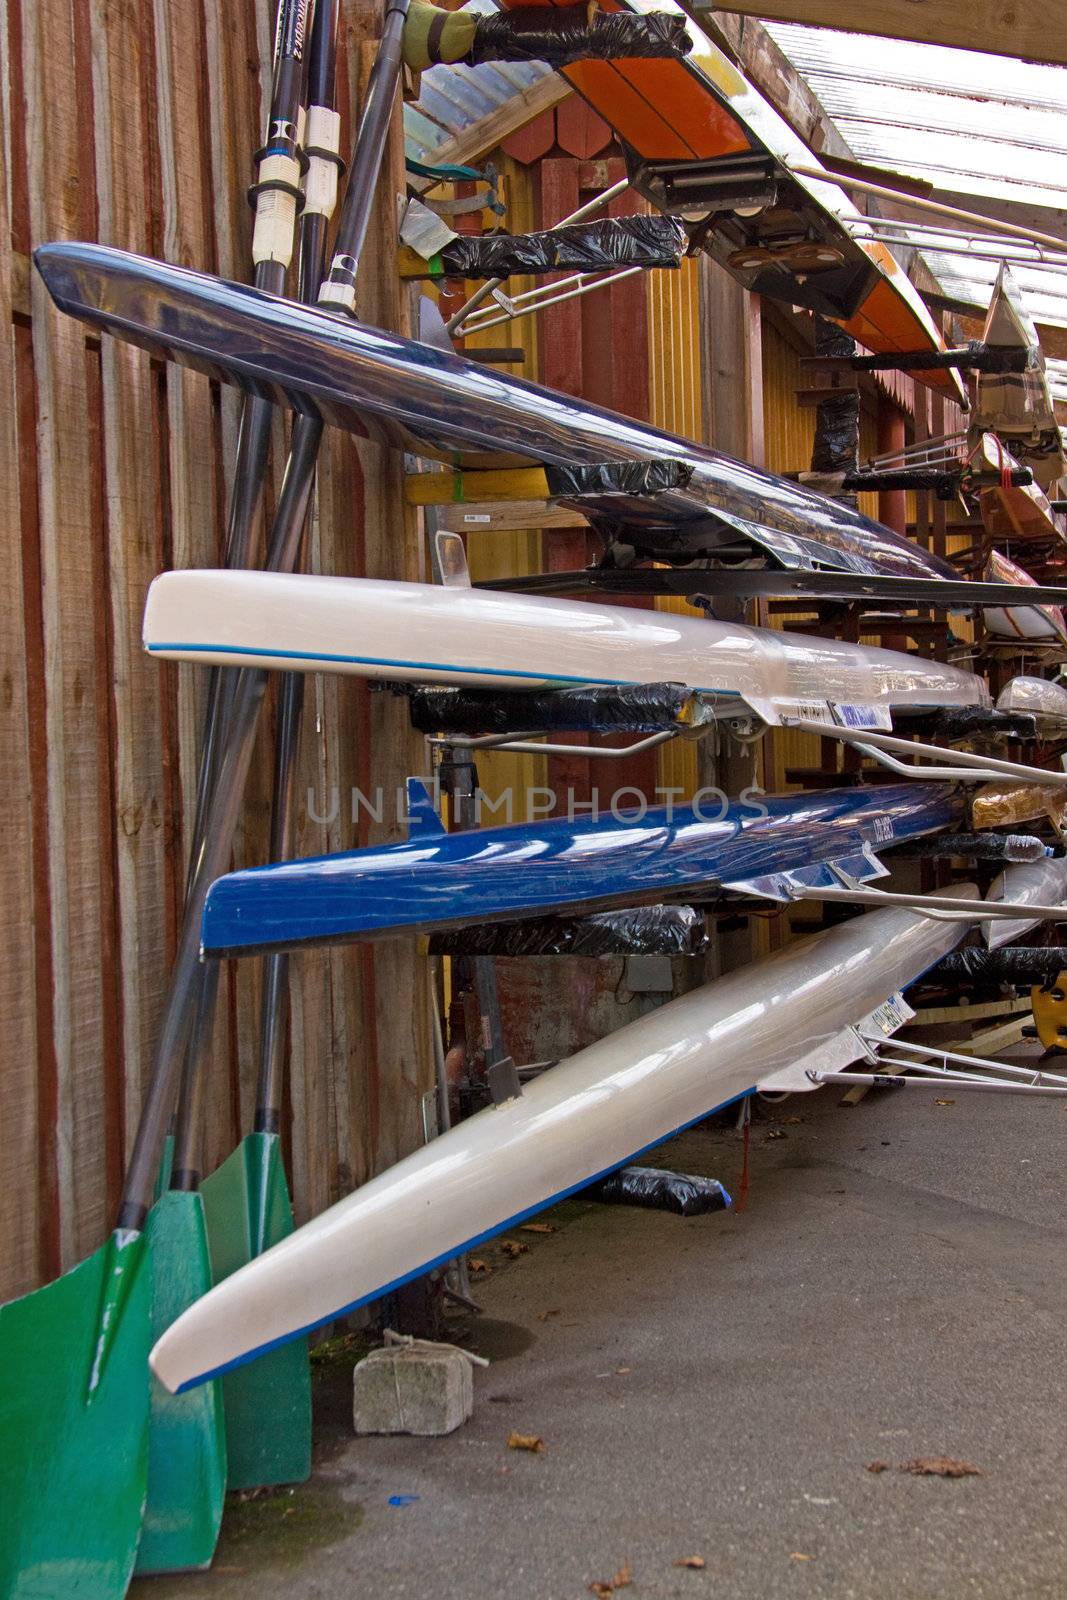 Quad sculls stacked in a boathouse